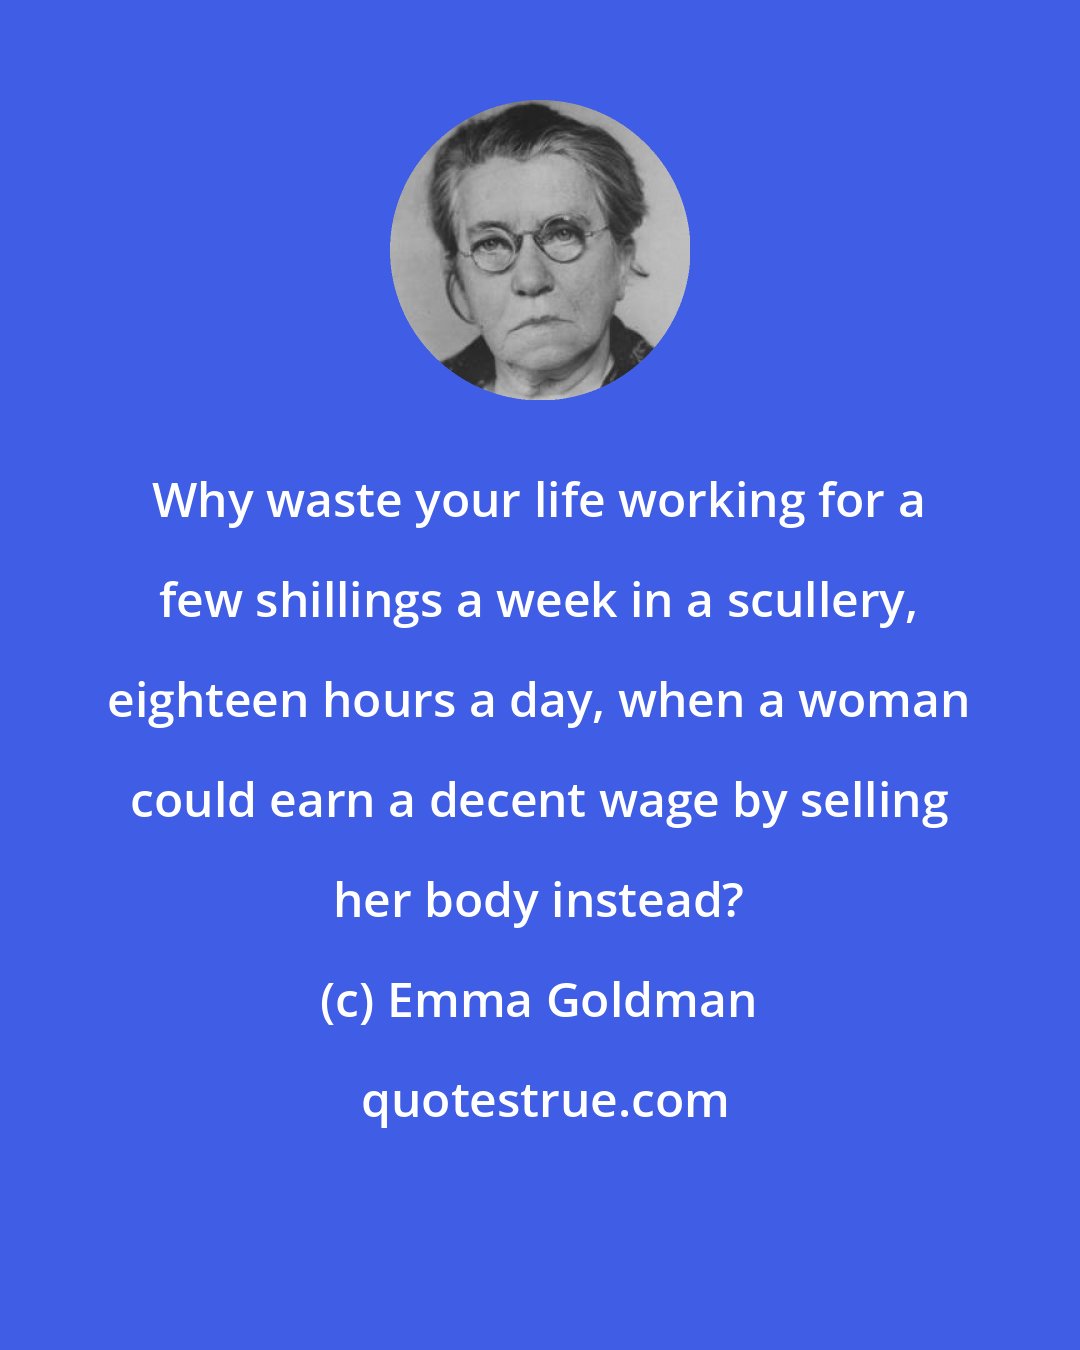 Emma Goldman: Why waste your life working for a few shillings a week in a scullery, eighteen hours a day, when a woman could earn a decent wage by selling her body instead?